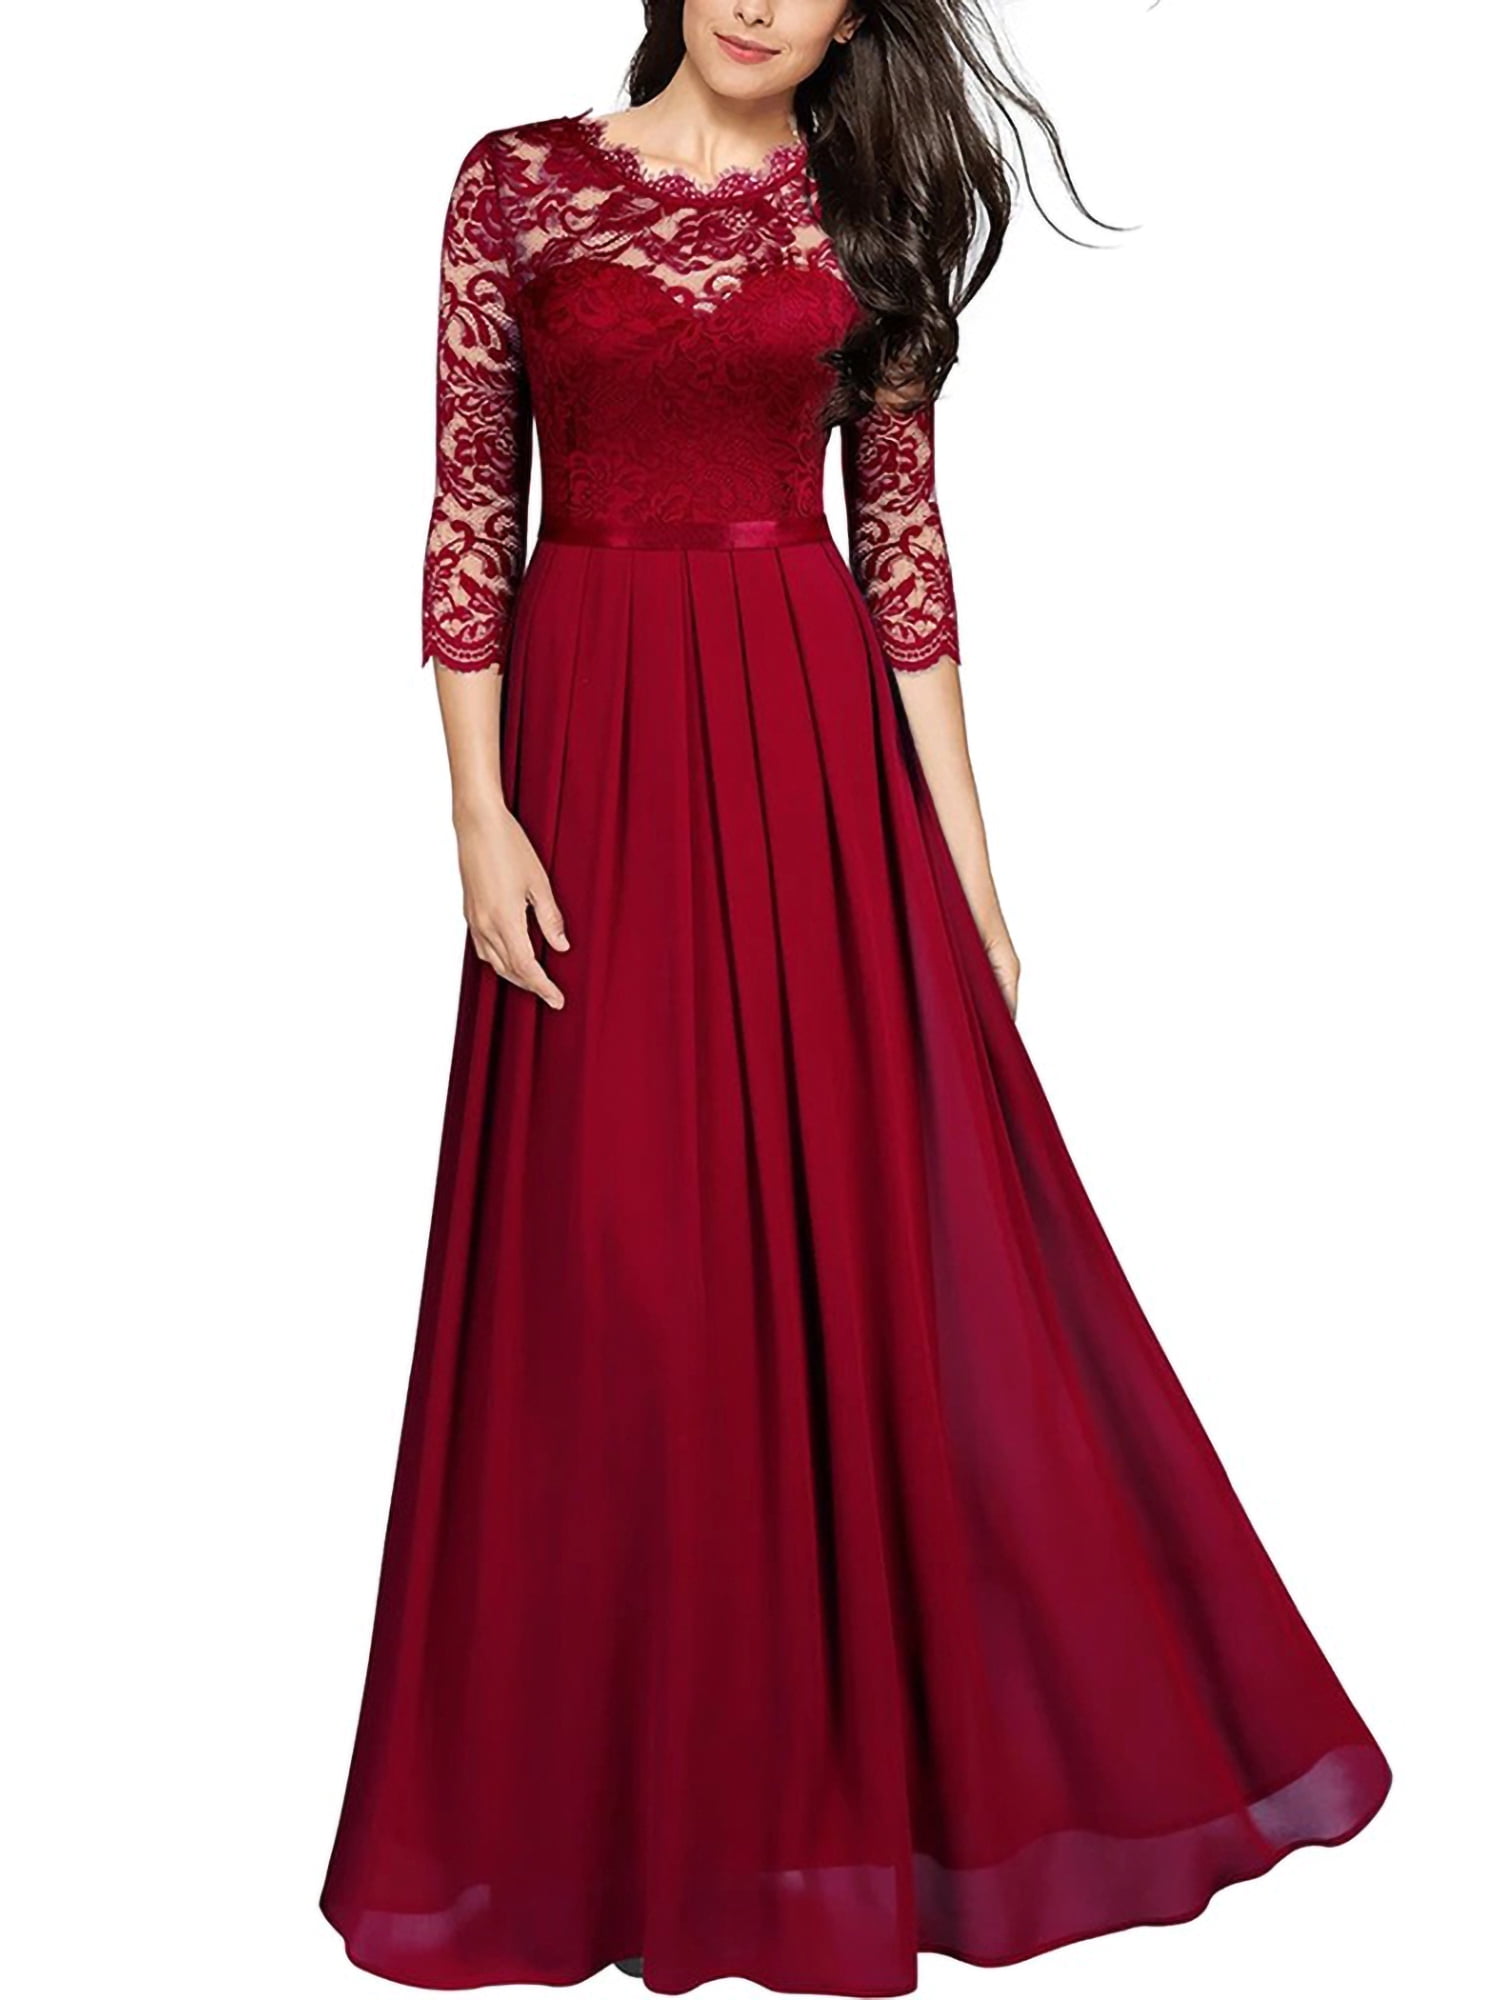 Ball Gown Dress Women Lace Formal Bridesmaid Prom Sexy Ladies Long